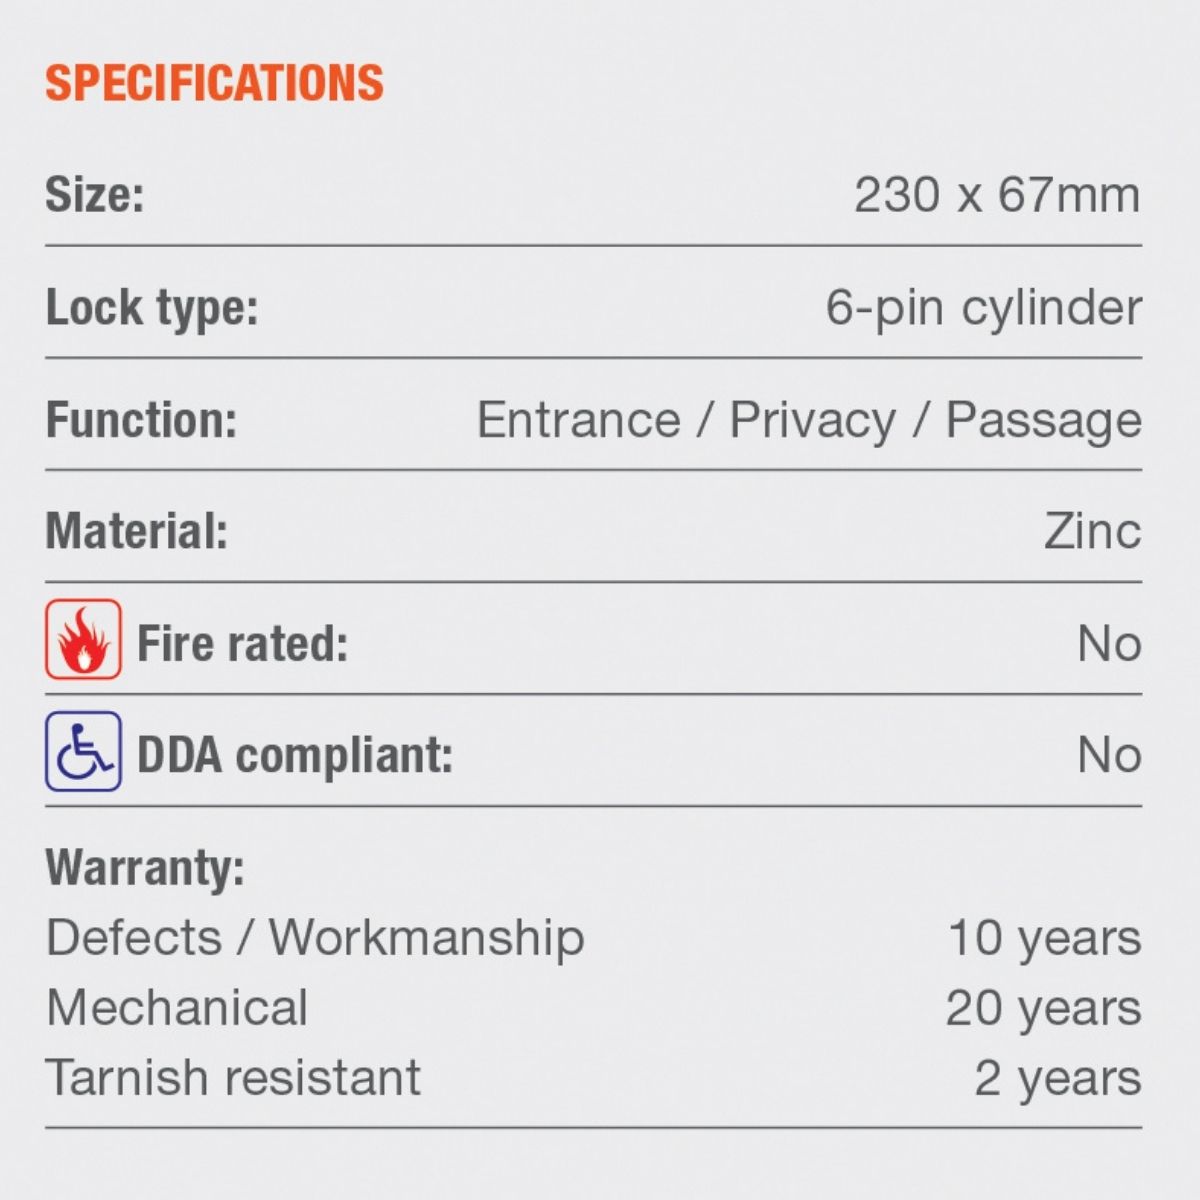 entry pro 3 specifications